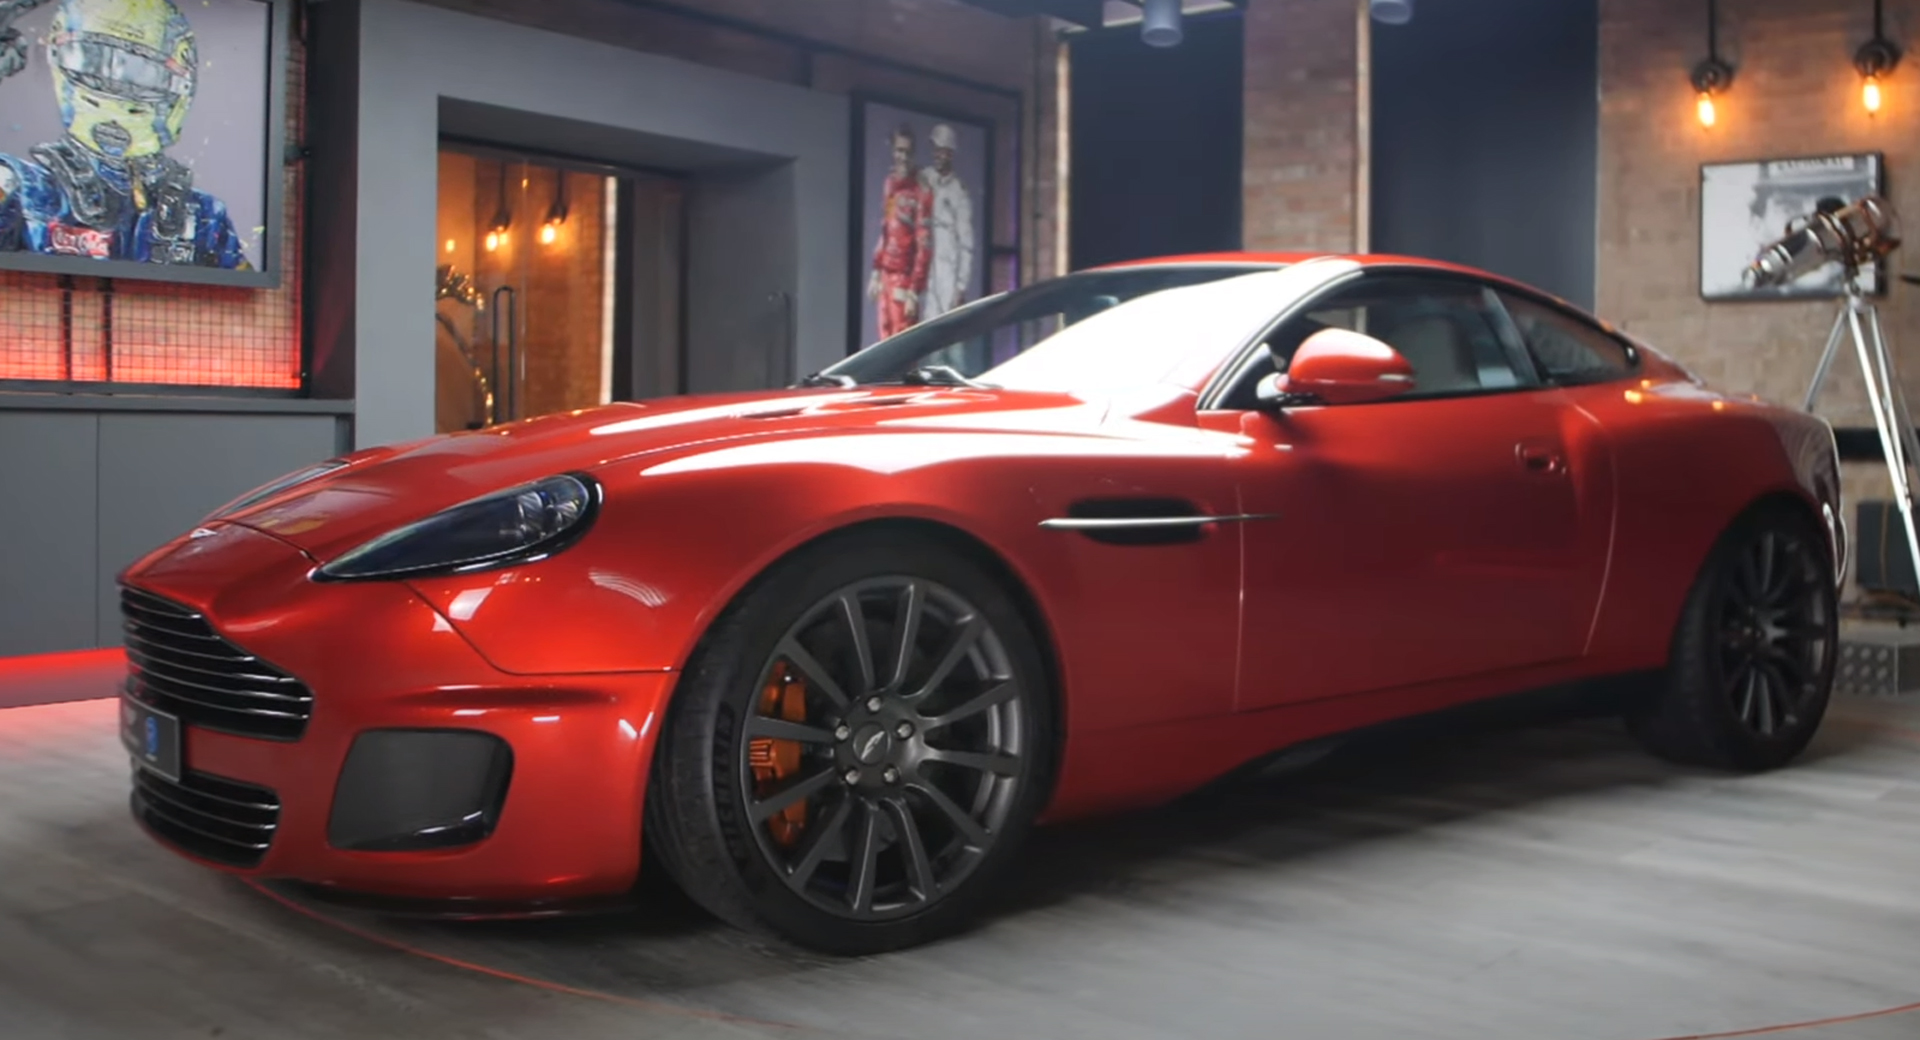 The Aston Martin Callum Vanquish 25 ‘Restomod’ Is All About The Small Particulars Auto Recent